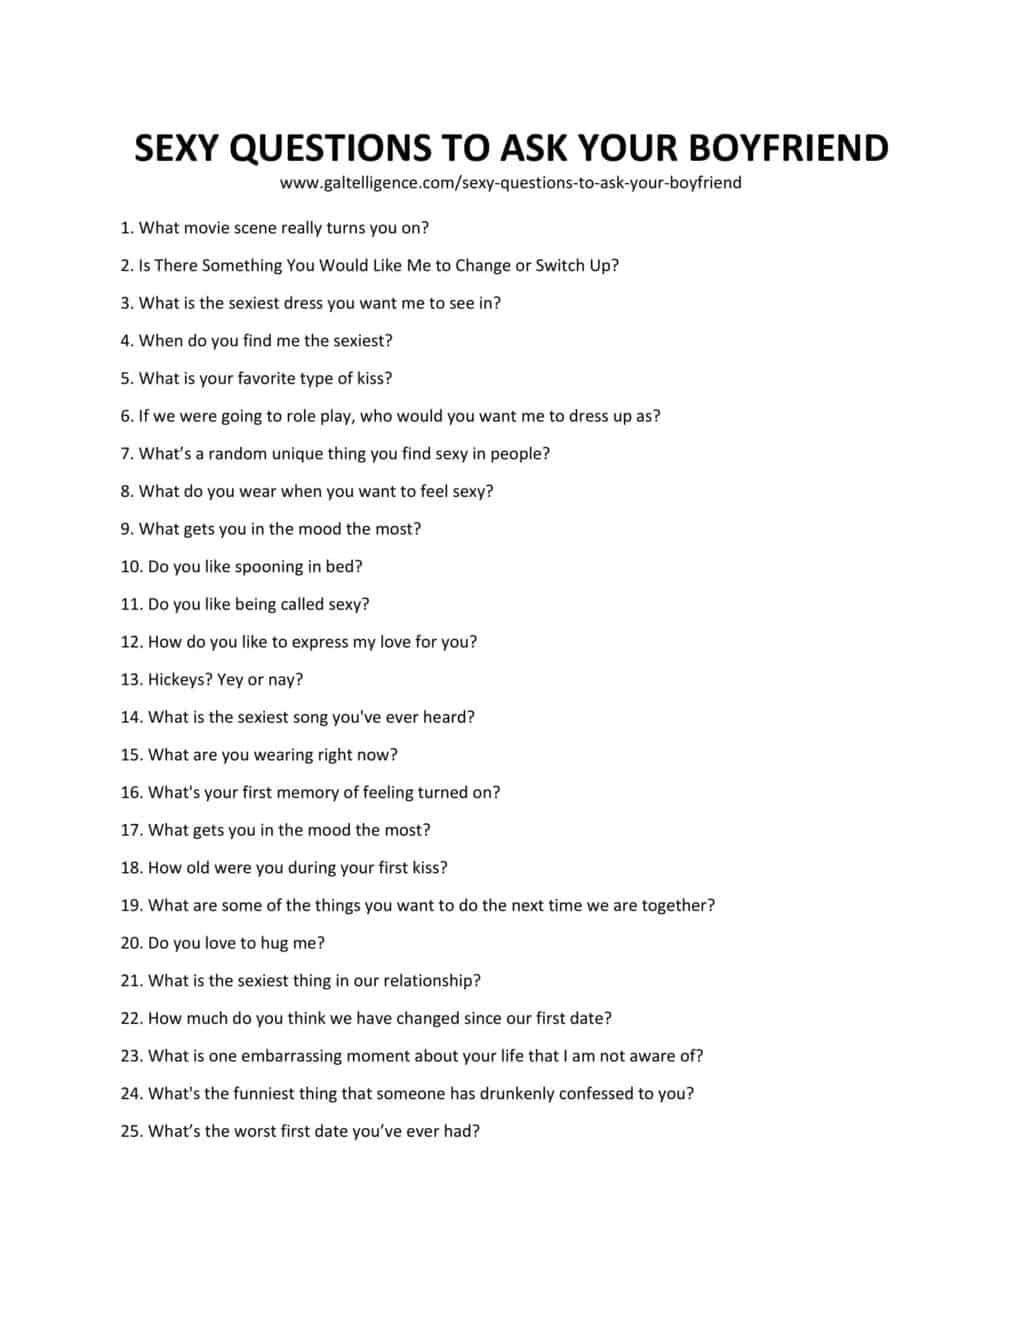 28 Sexy Questions To Ask Your Boyfriend - Easily Keep The Fire Burning